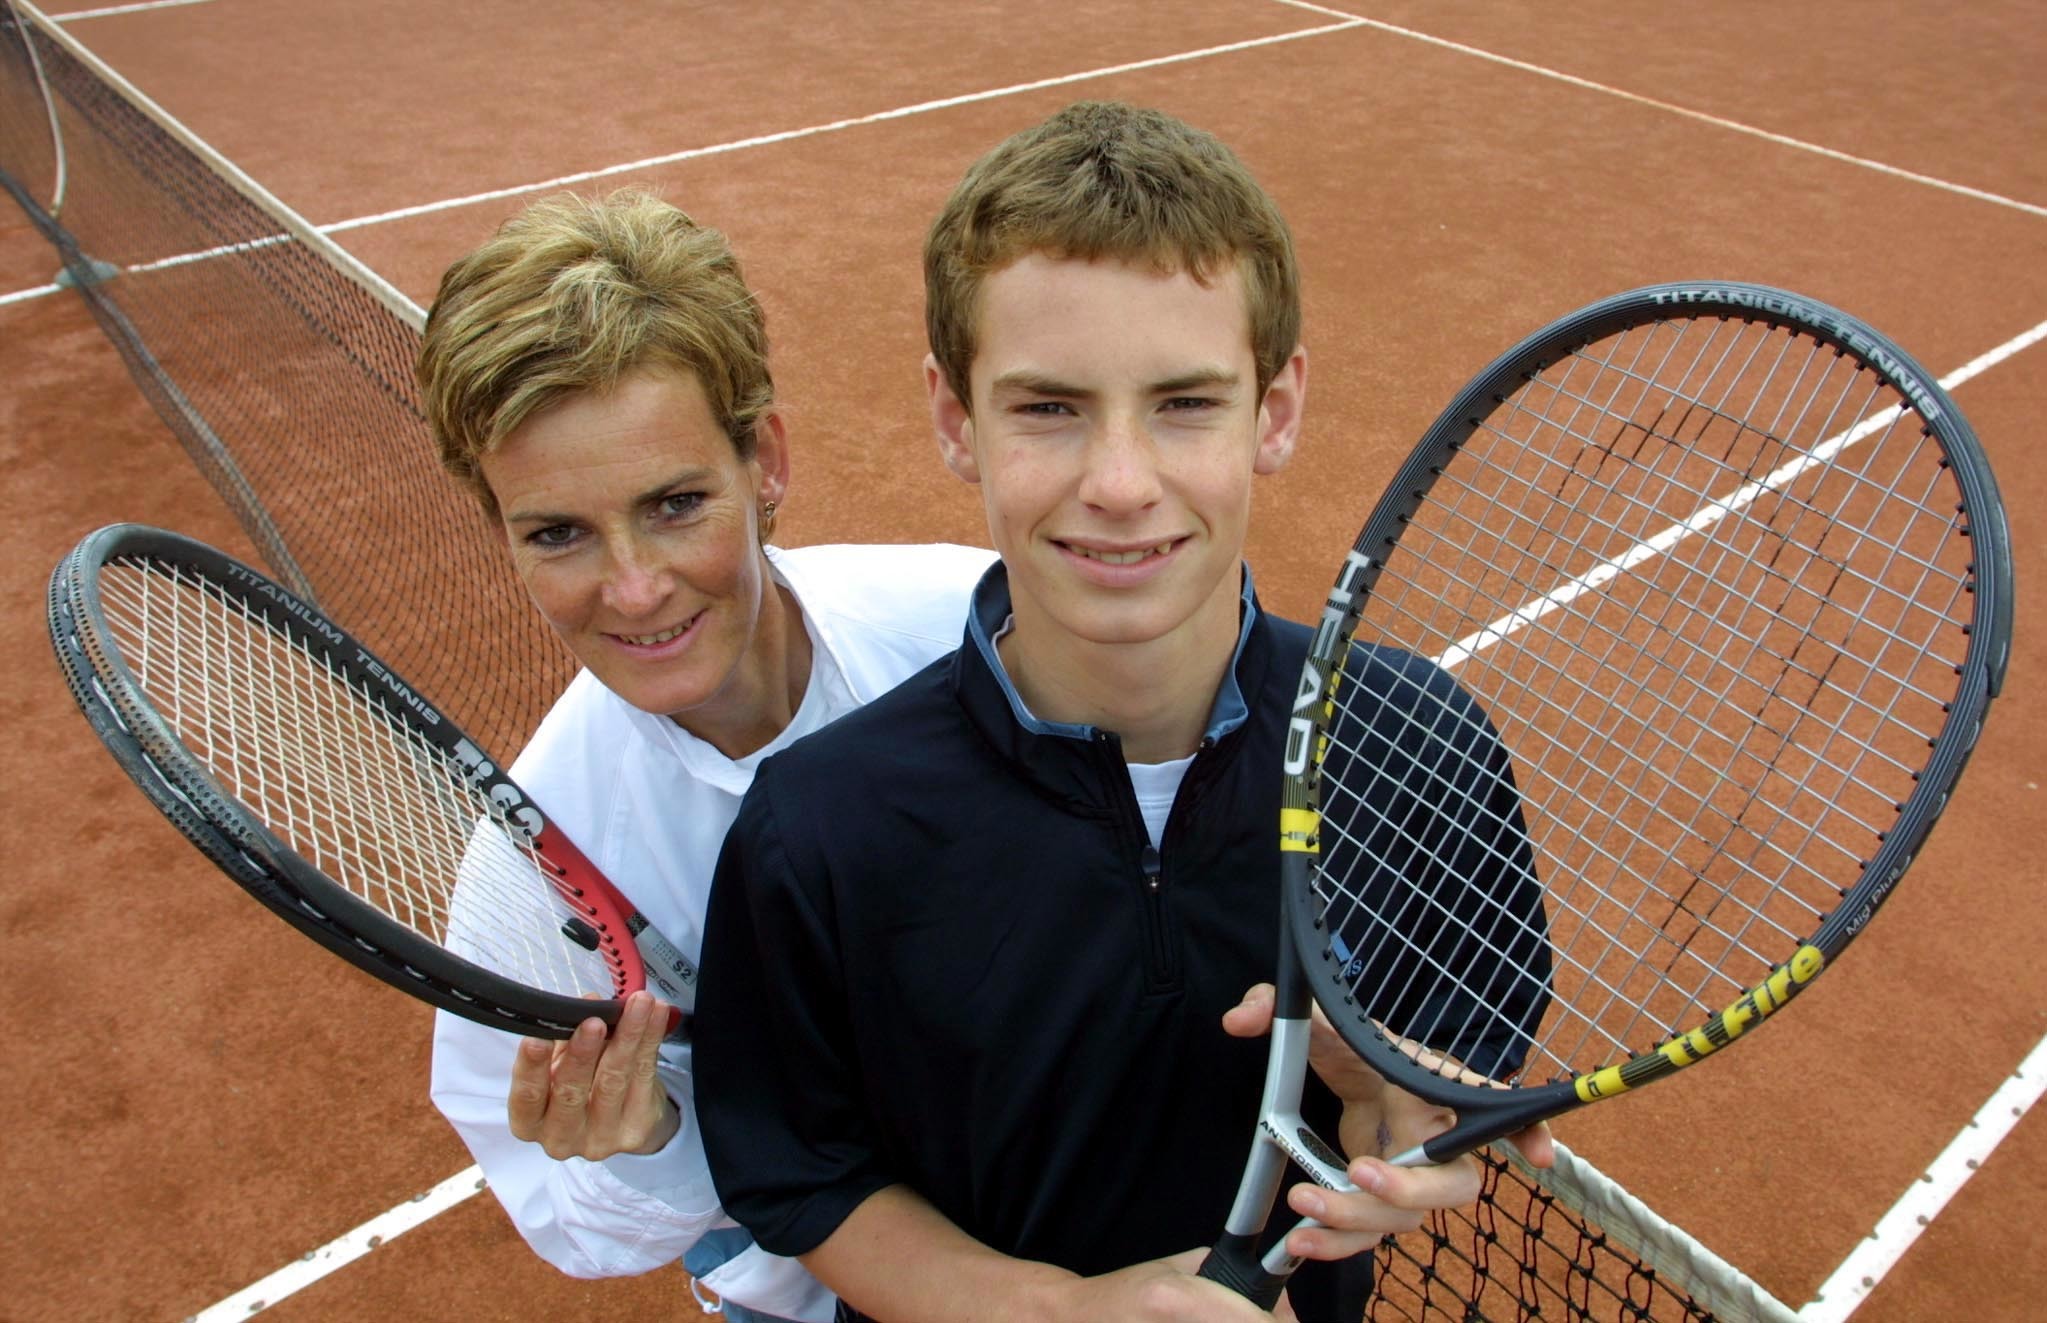 Judy with a 14-year-old Andy Murray (John Lindsay / Perthshire Picture Agency)